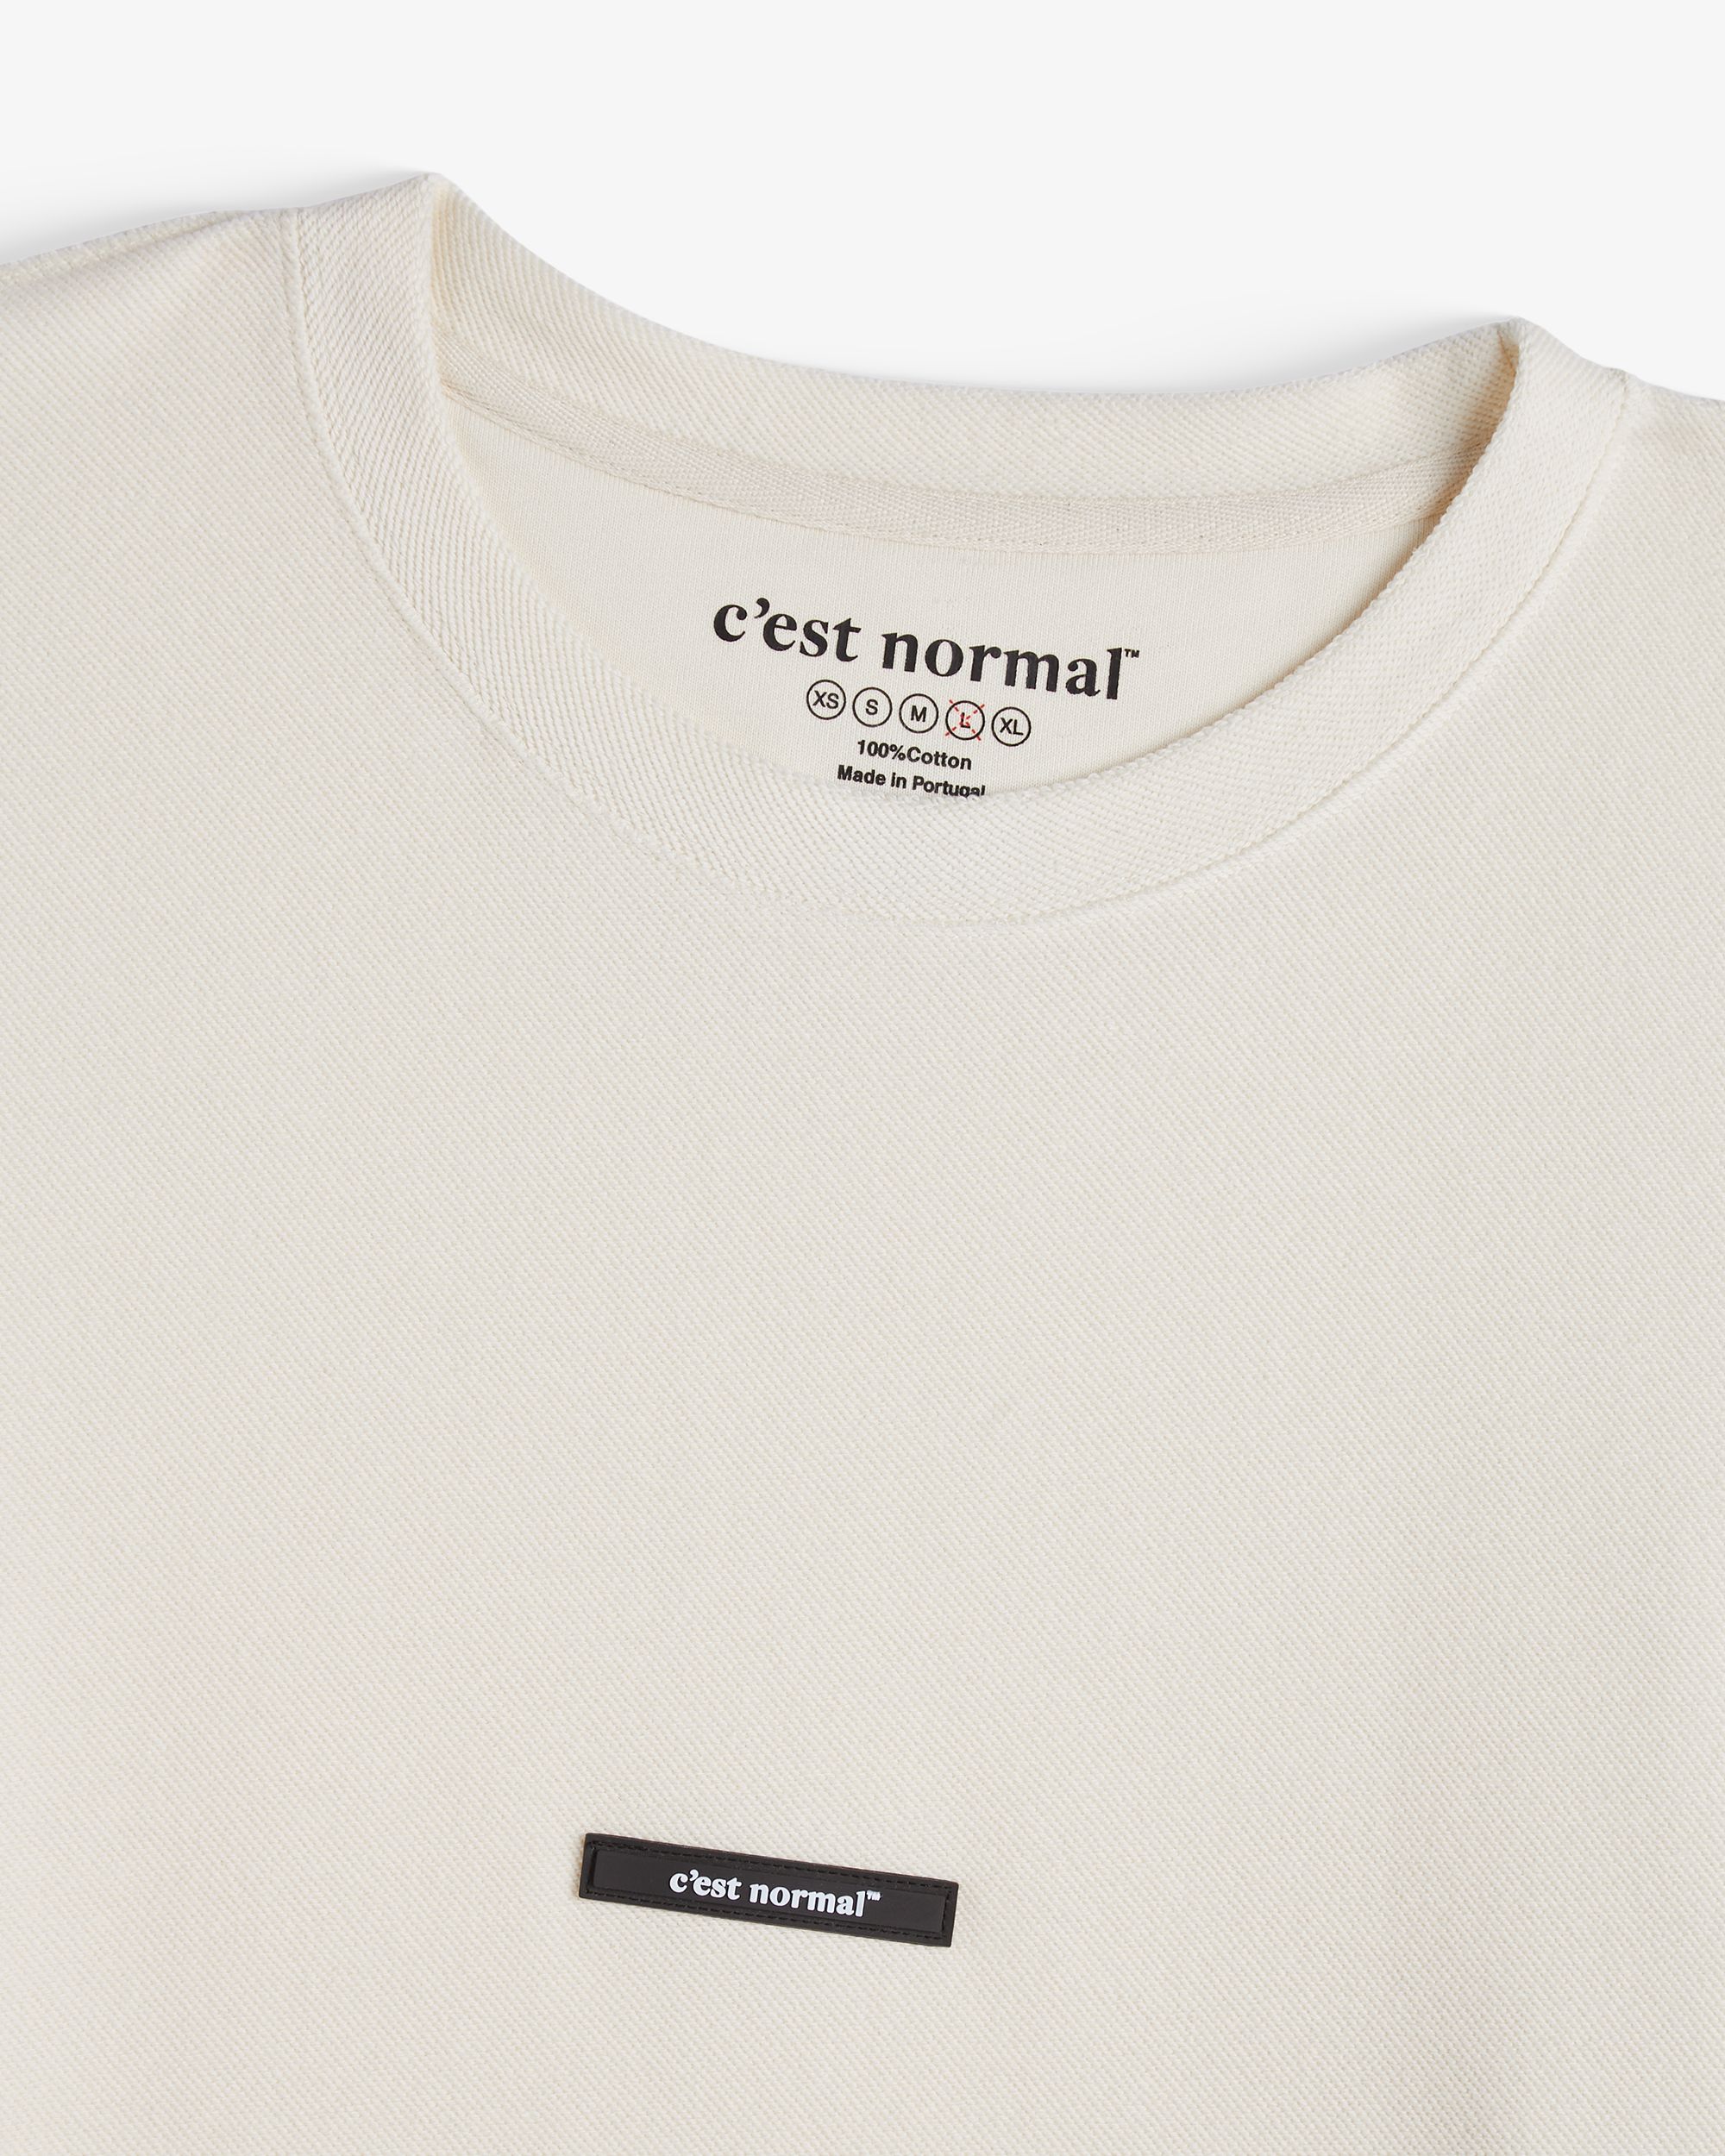 The Inside-Out Long Sleeve T | c'est normal - Around here.